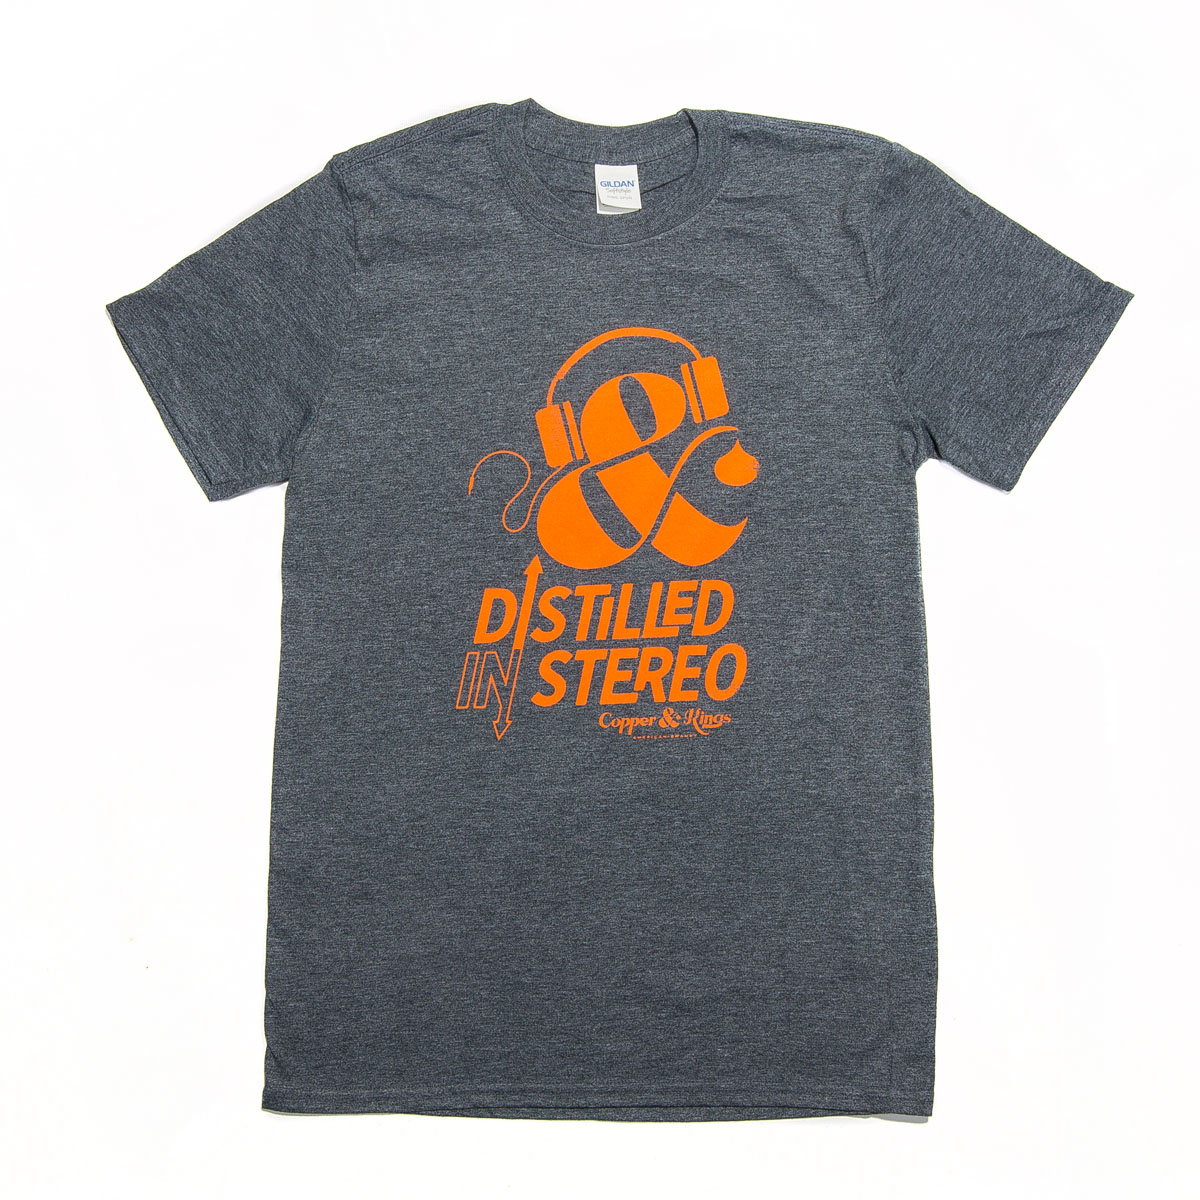 Distilled in Stereo T-shirt